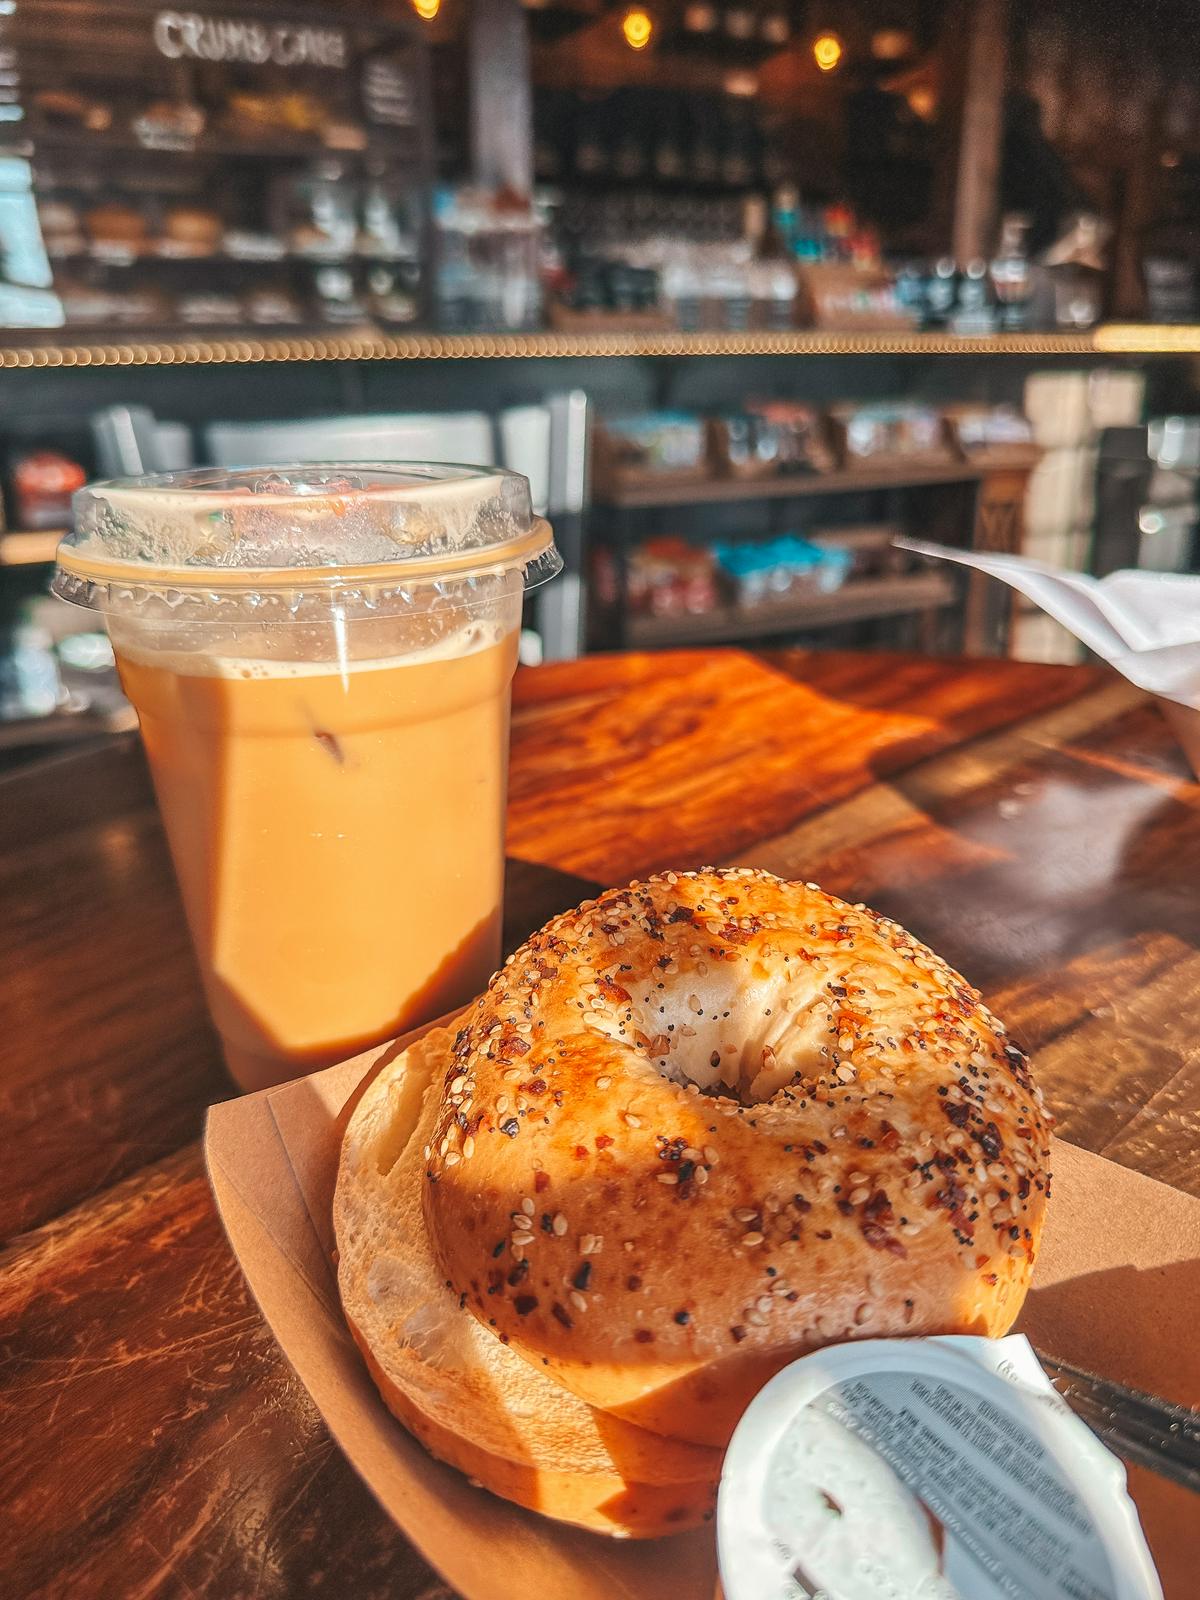 Cold brew and everything bagel from City Perks Coffee Shop in St. Augustine